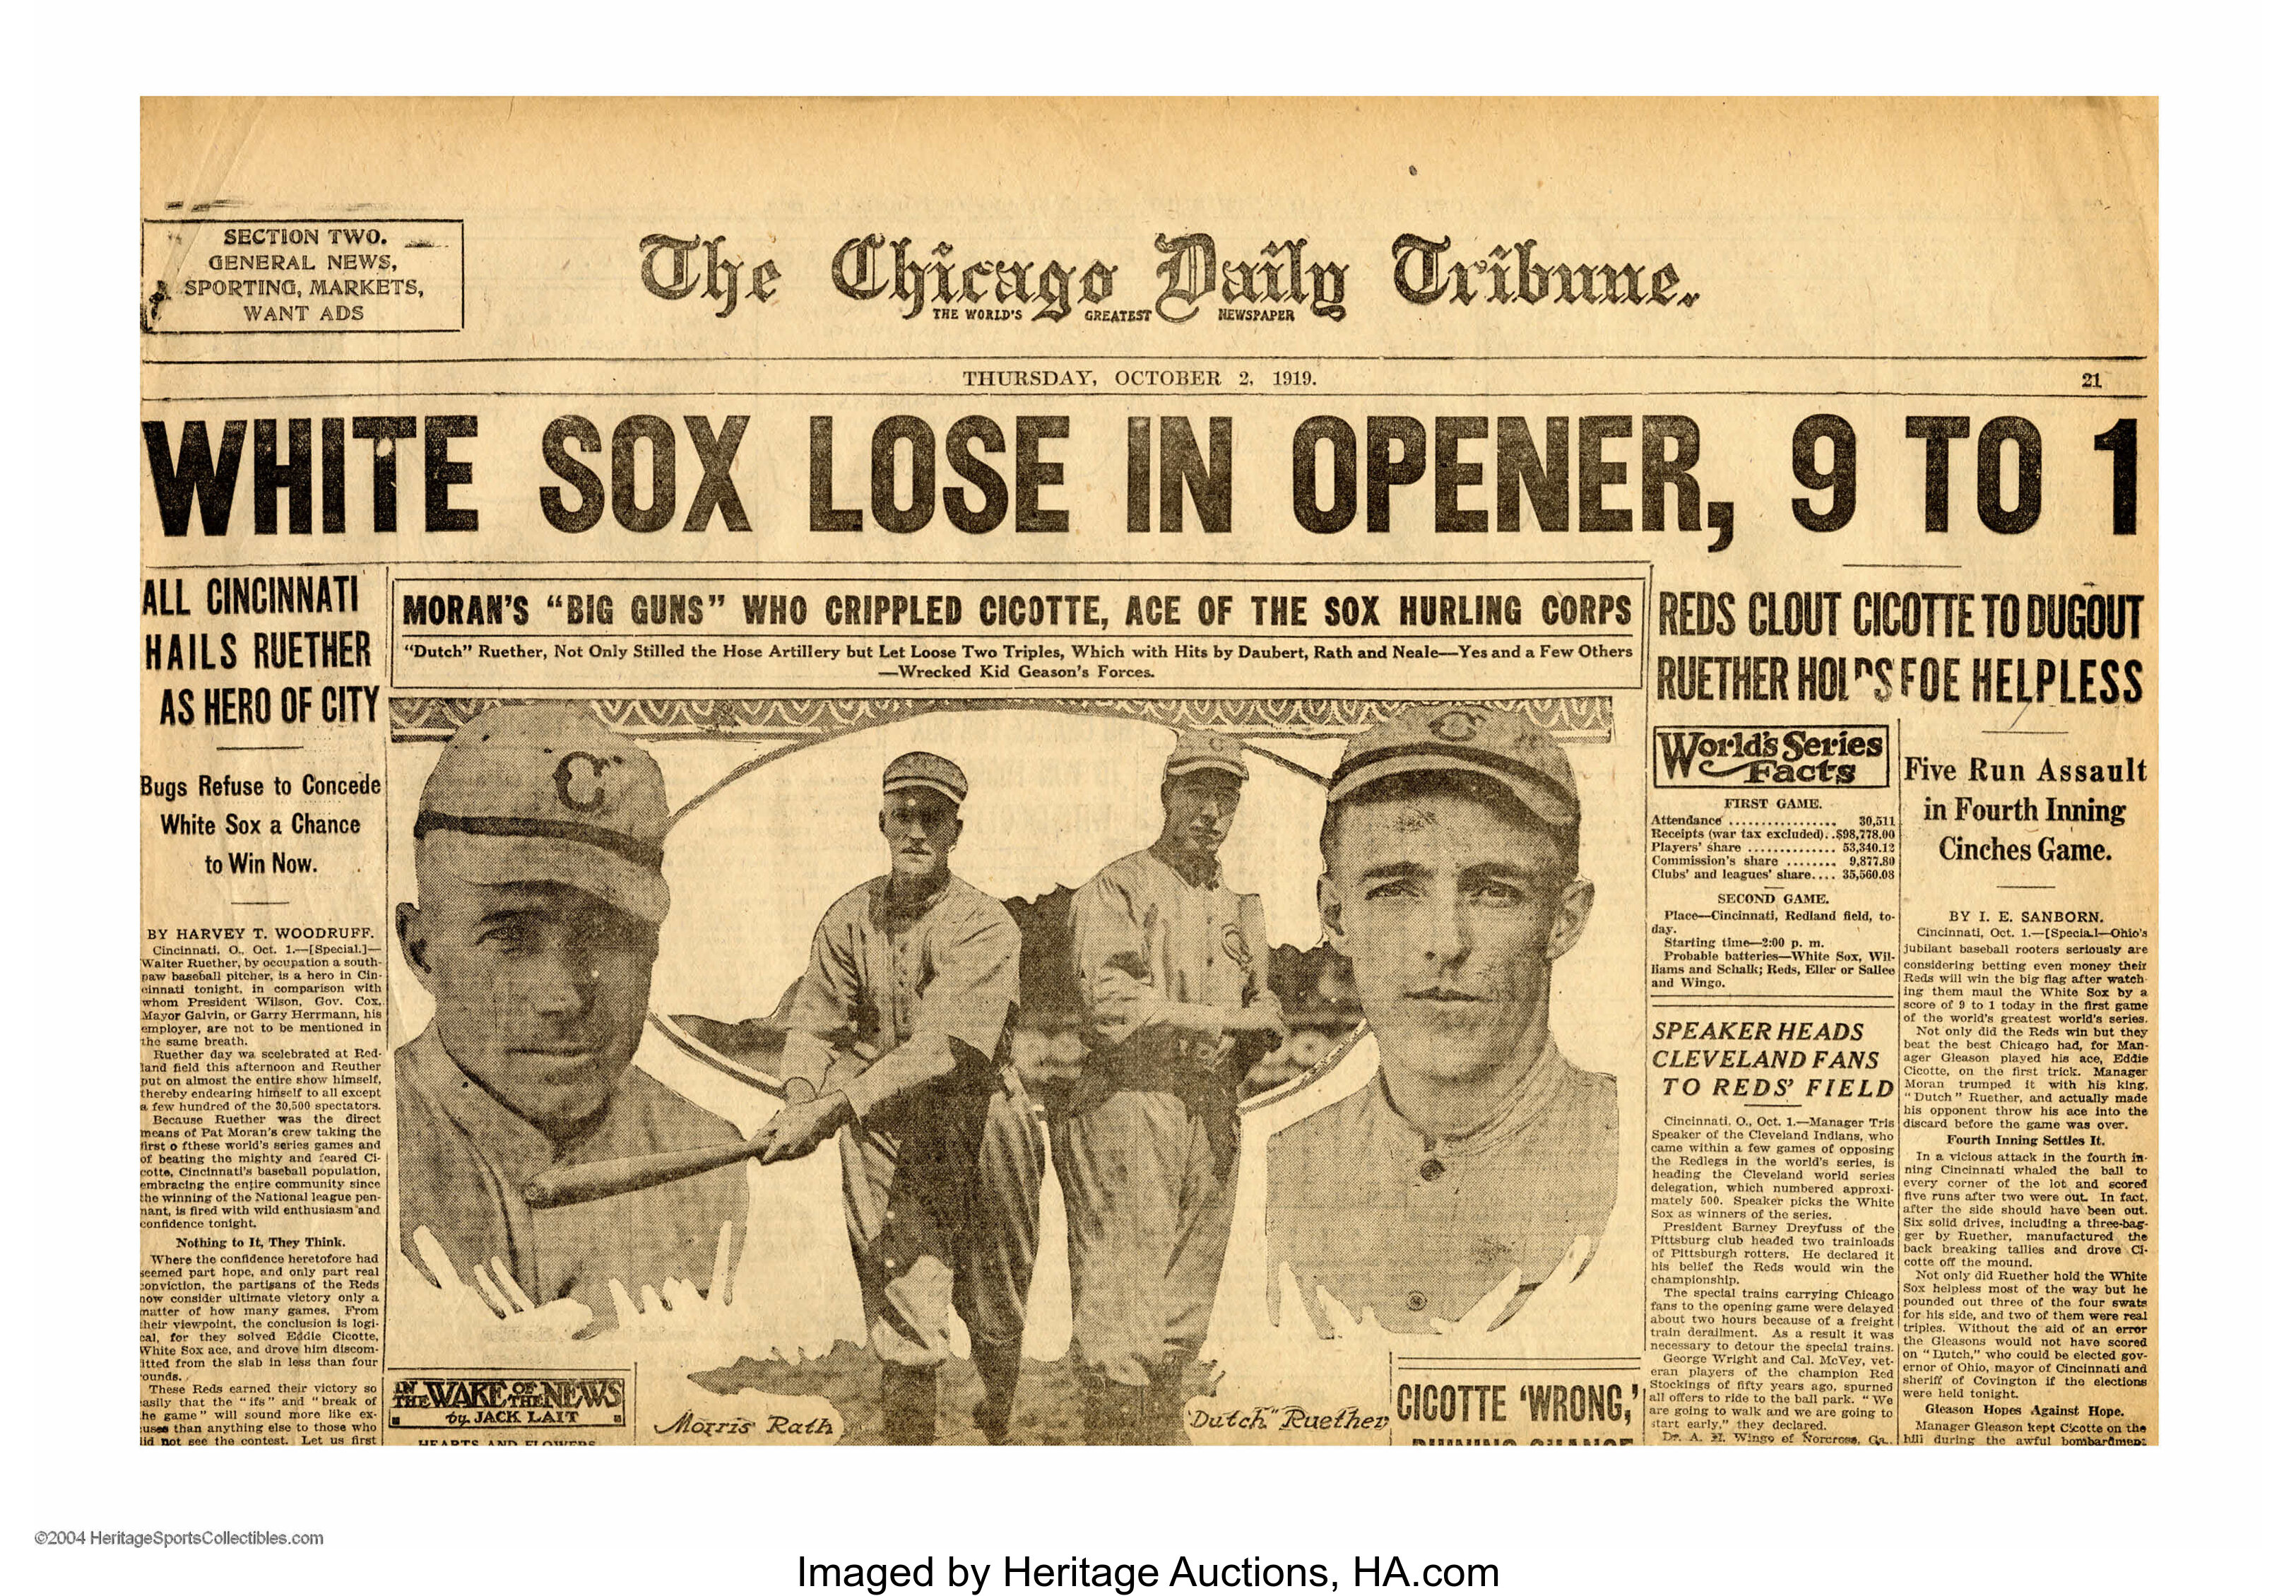 CHICAGO WHITE SOX, 1919. The 1919 Chicago White Sox at